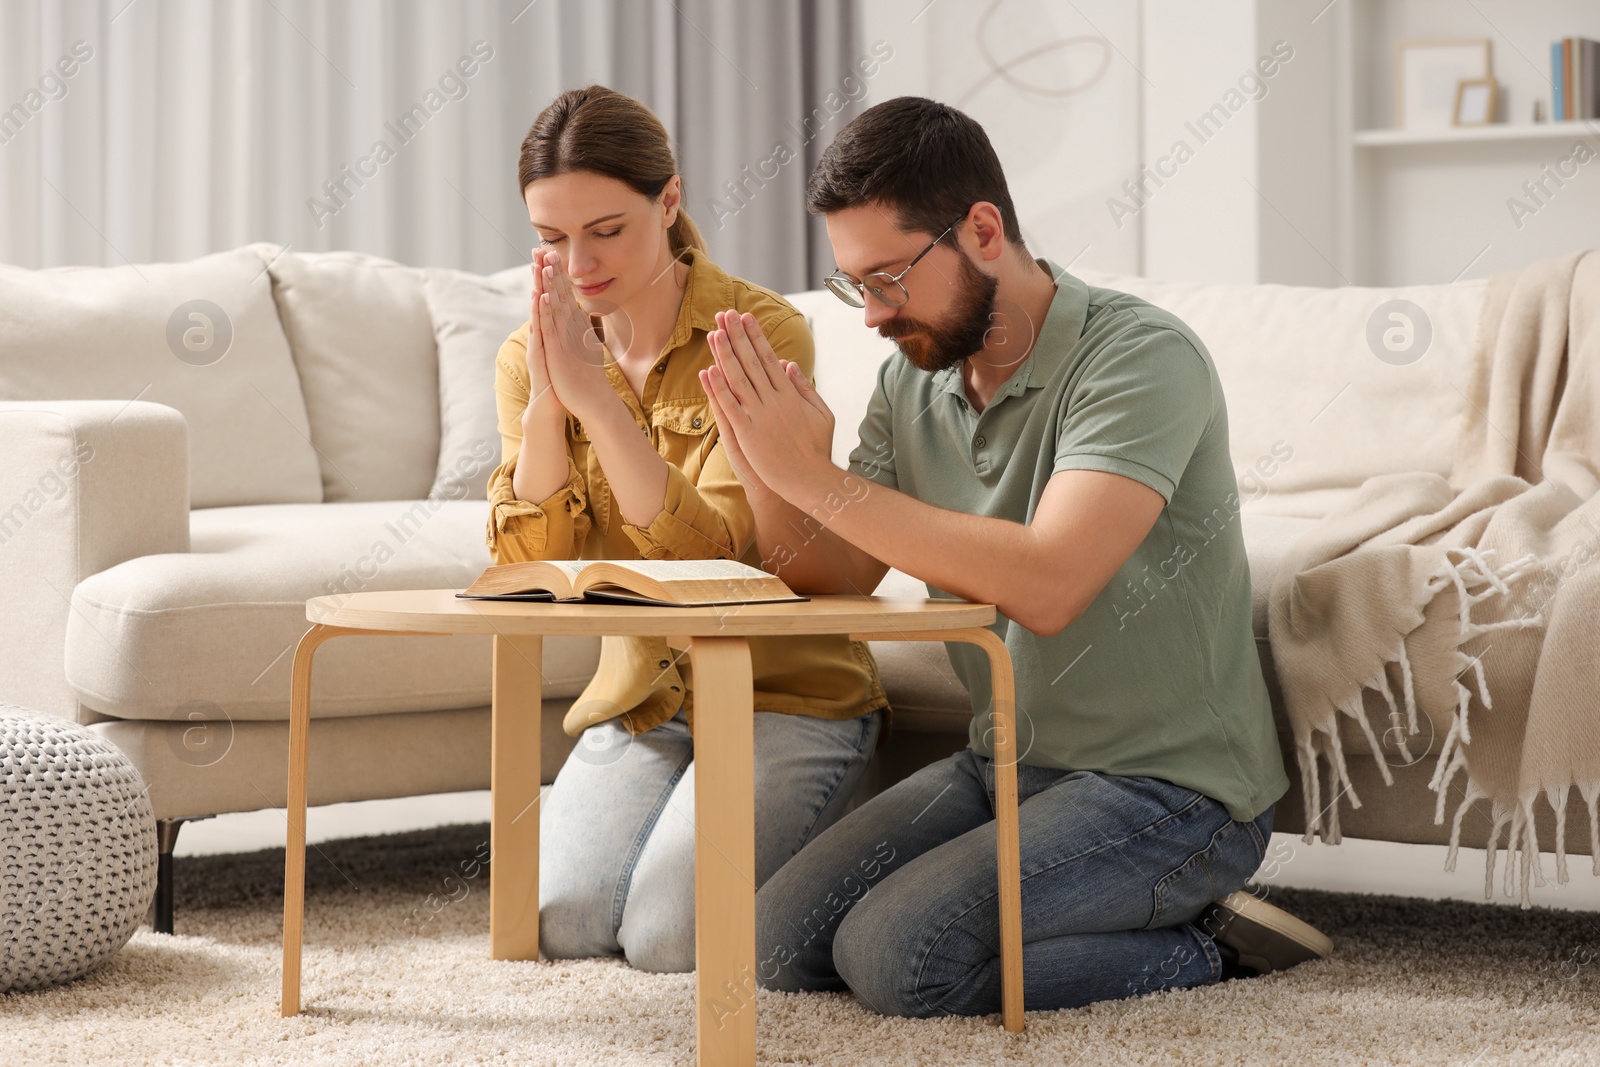 Photo of Family couple praying over Bible together at table indoors